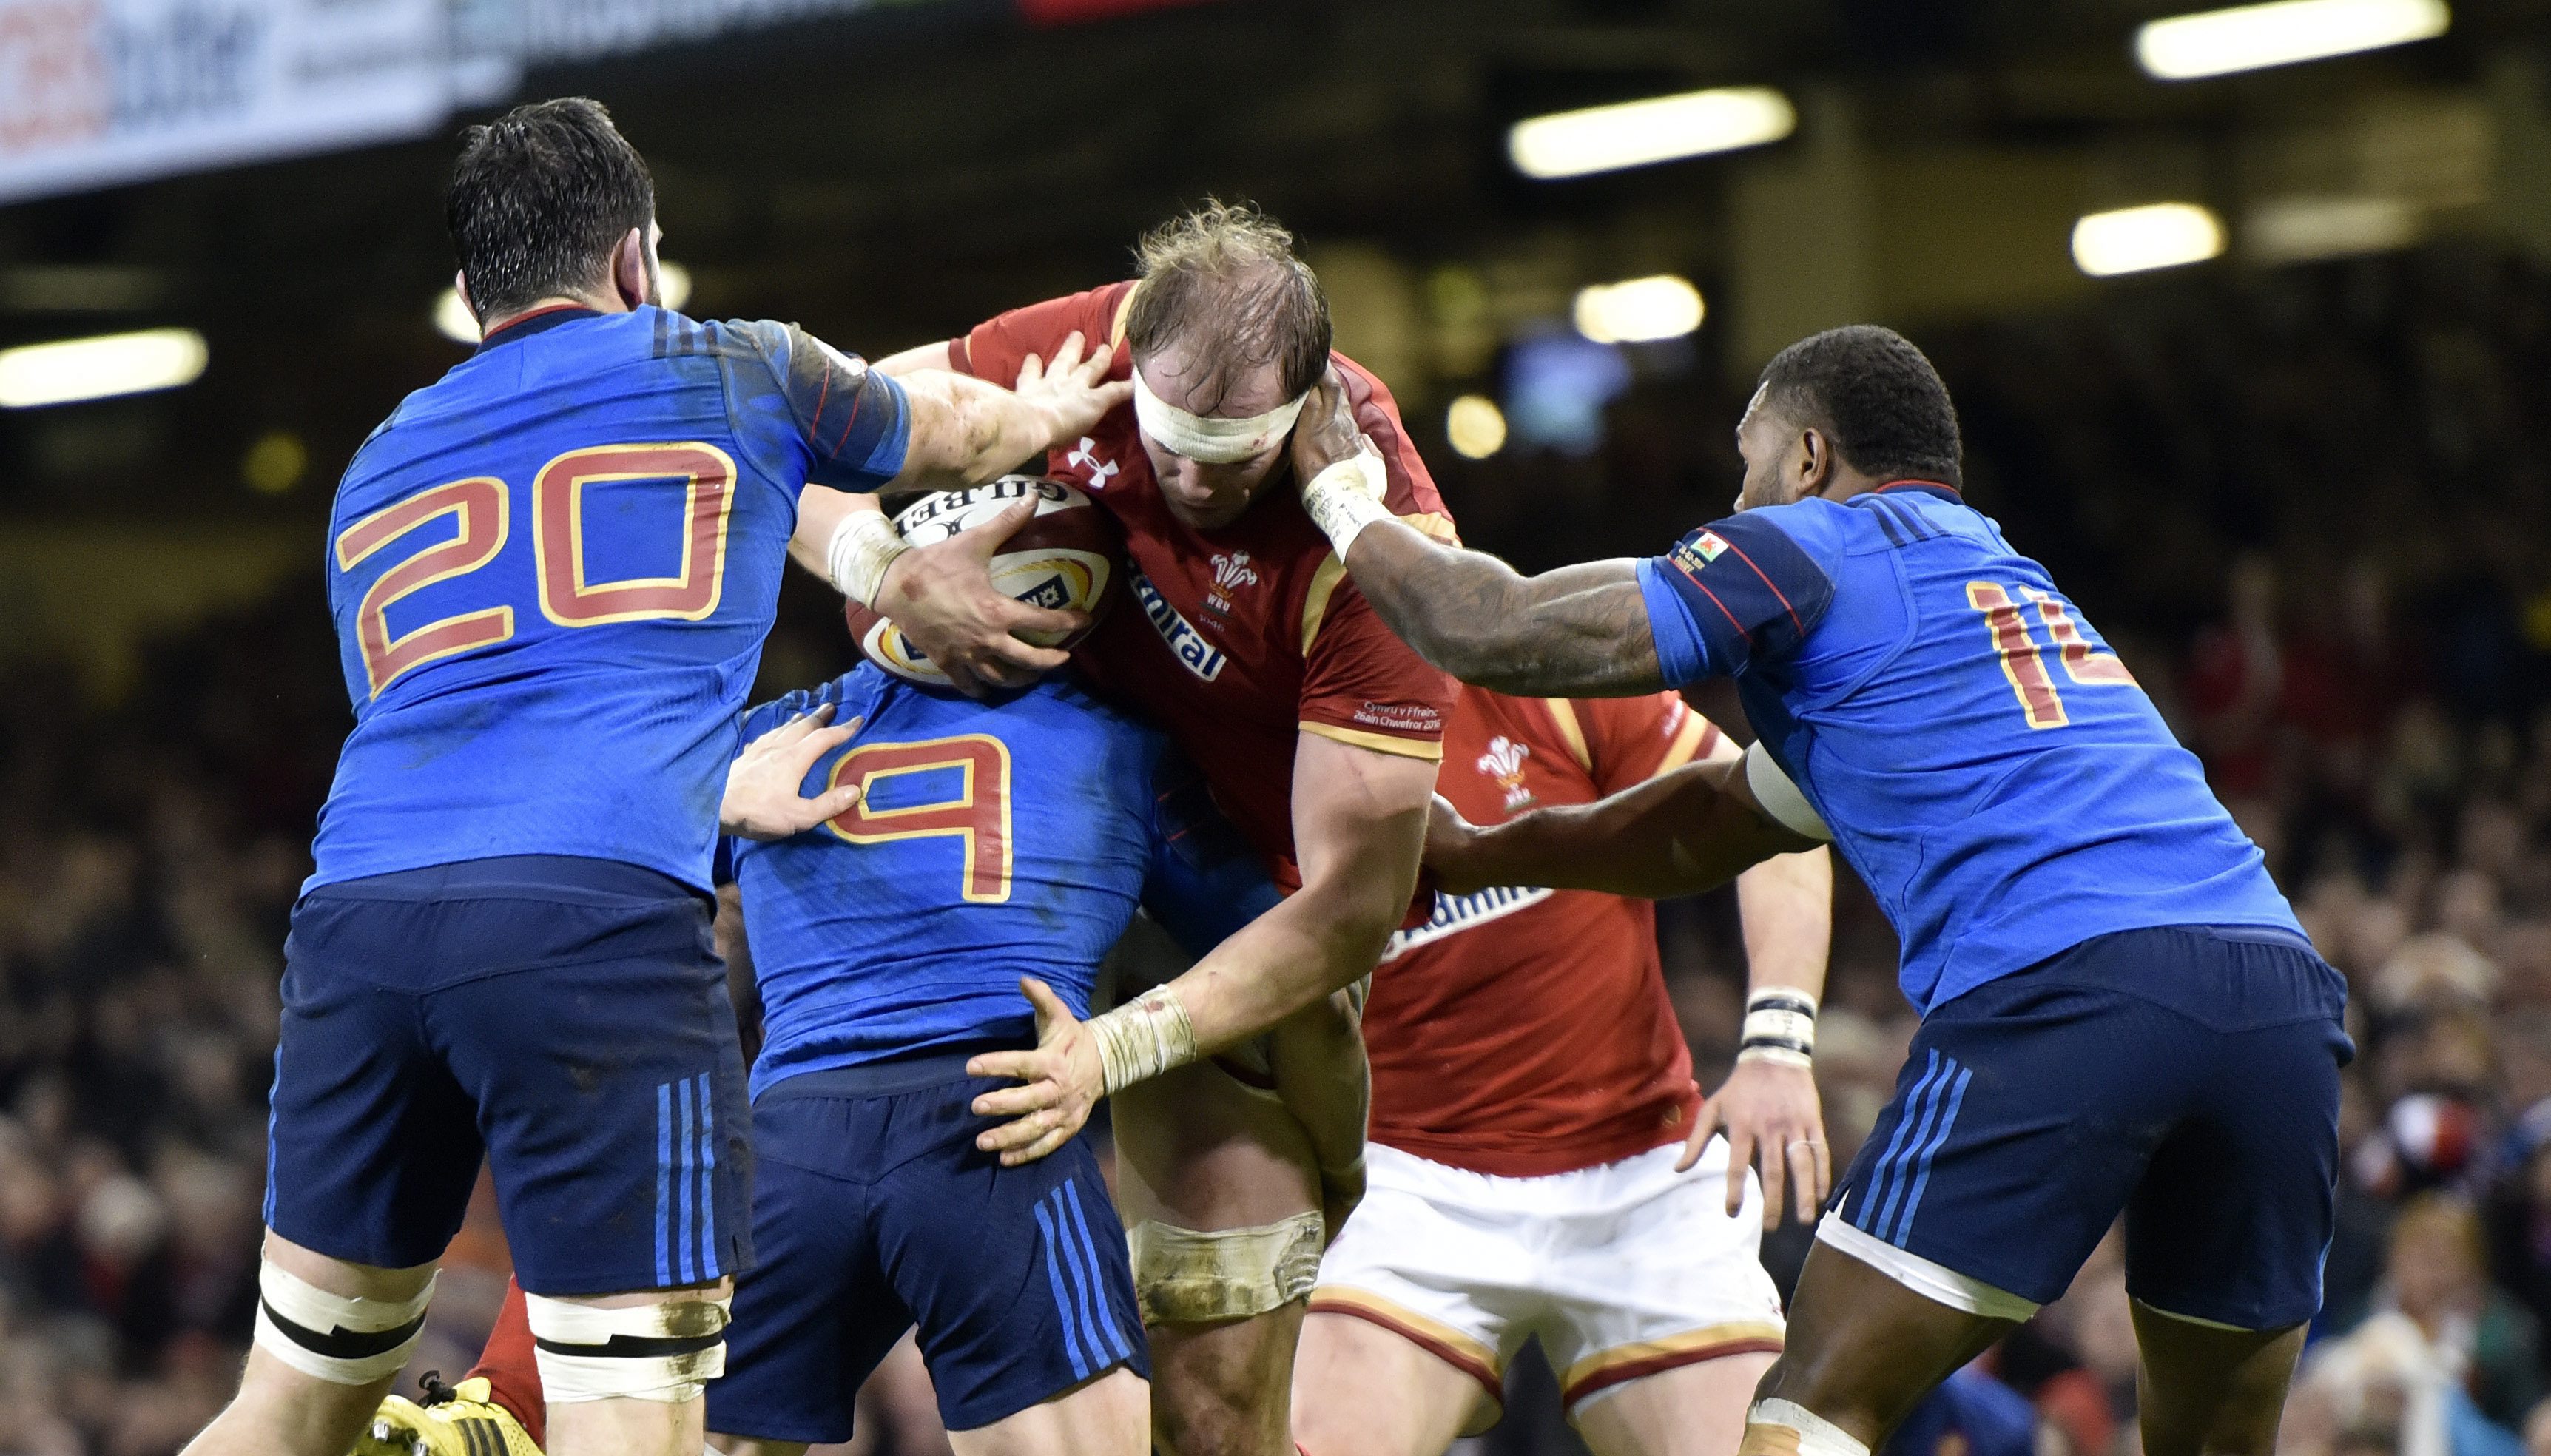 Wales’ win keeps them on course for a fourth Six Nations title under Warren Gatland. Photo: EPA